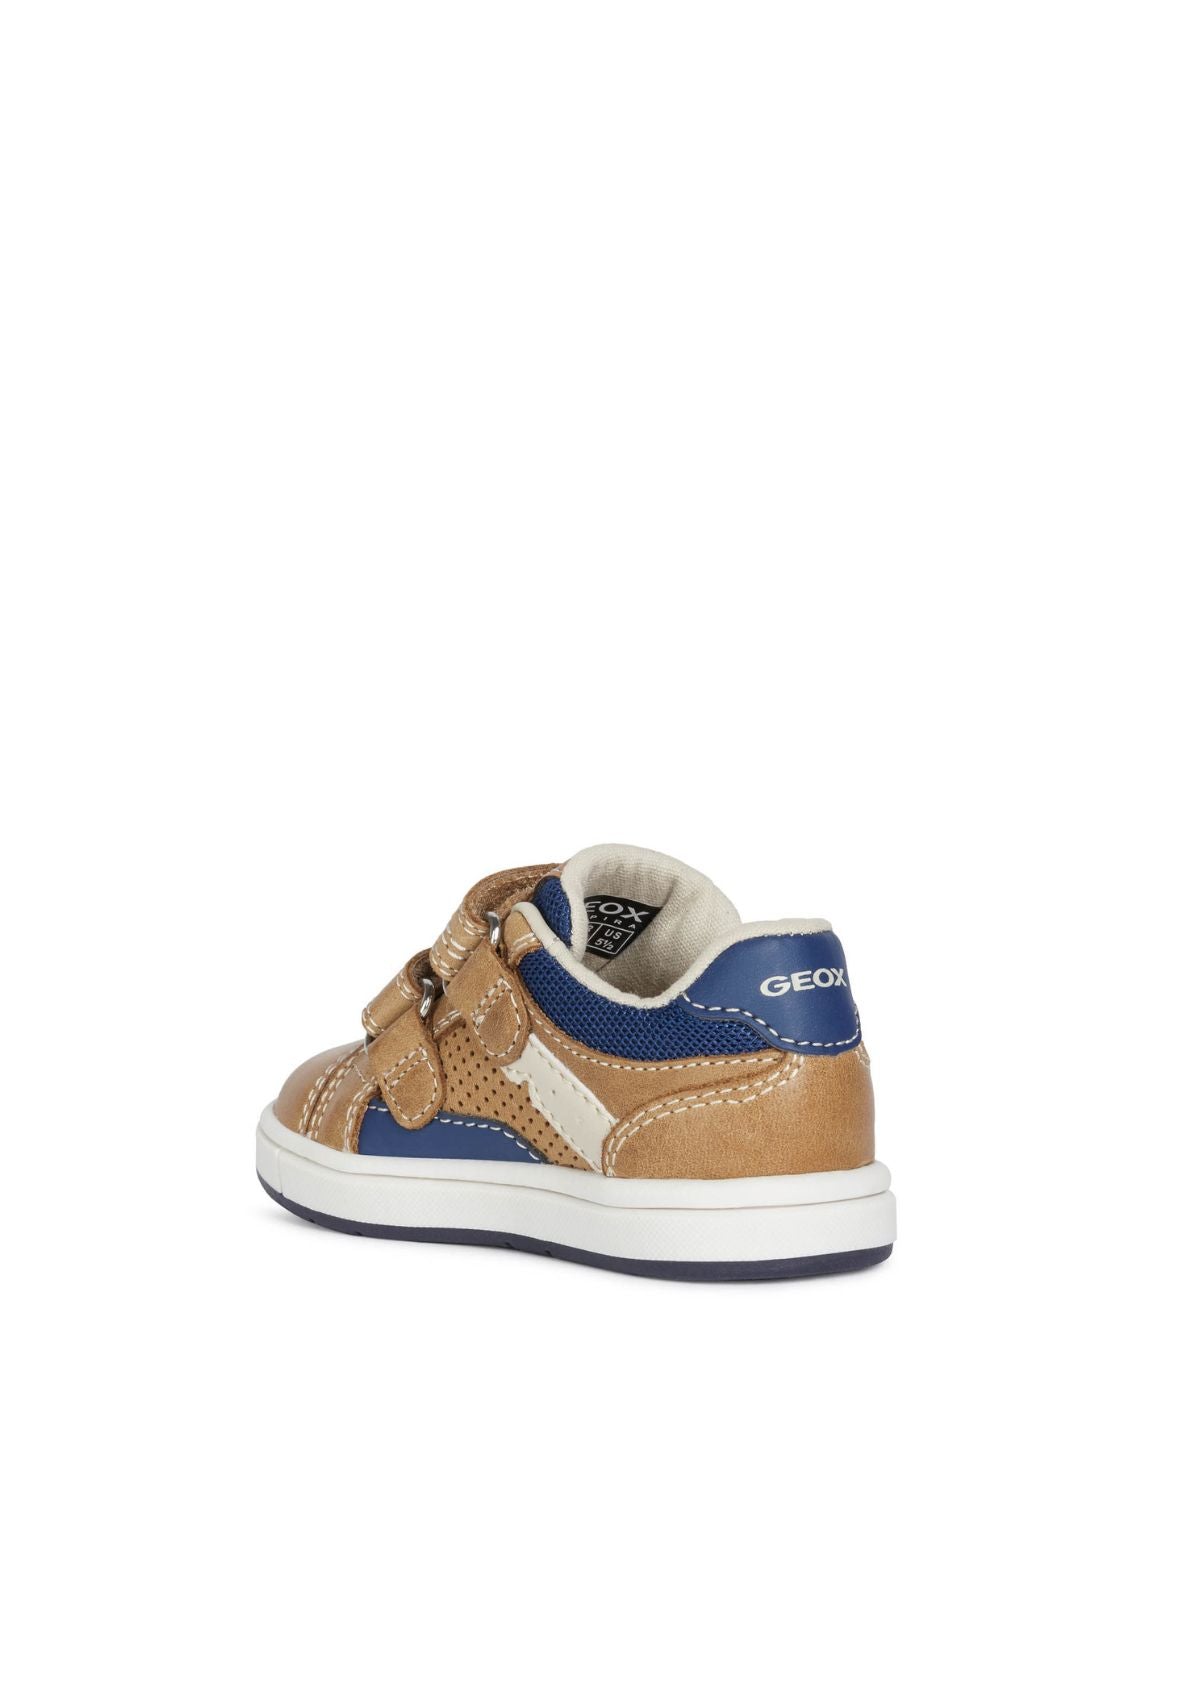 Geox Baby Boys Trainers TROTTOLA Caramel Navy back